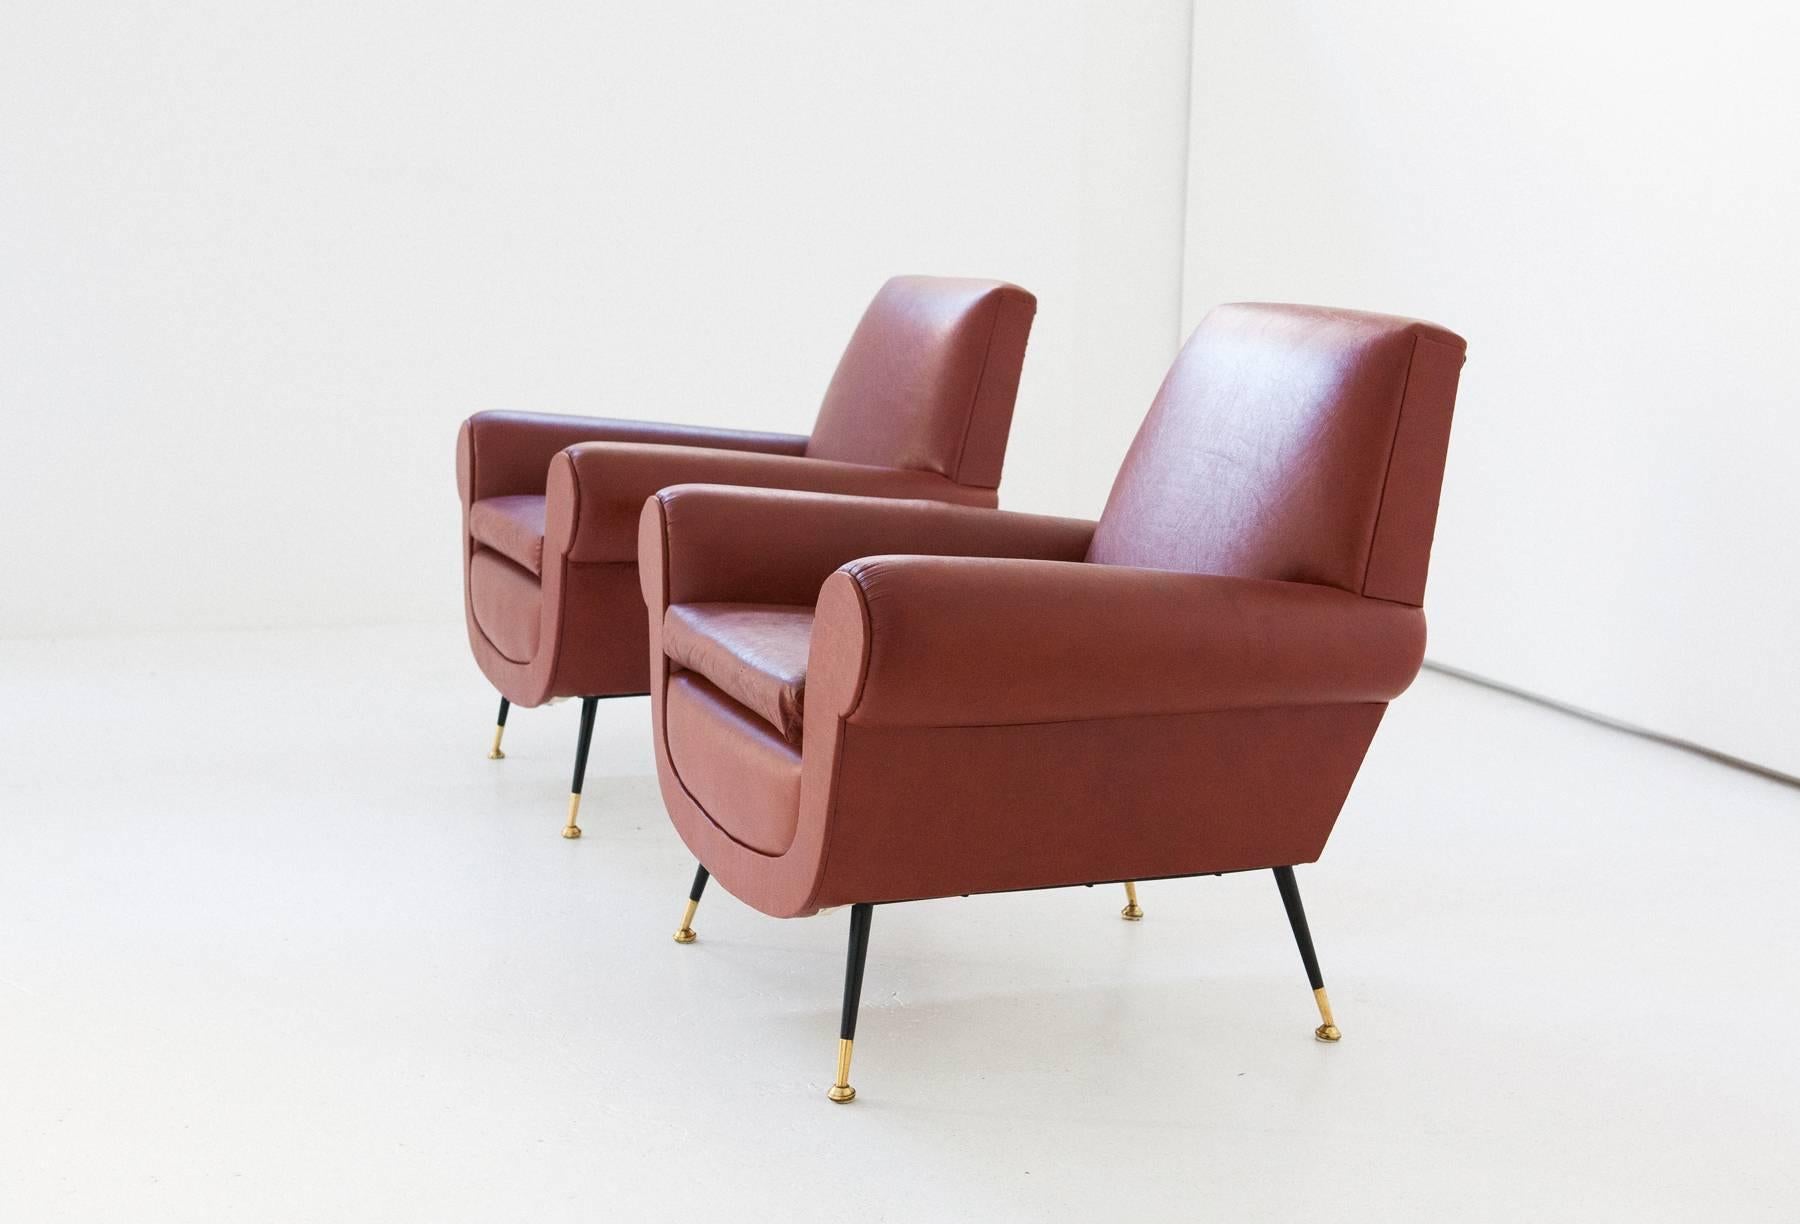 Set of two armchairs in faux brown or orange leather with iron legs and brass feets
Italian design by Gigi Radice for Minotti
1950s.

The upholstery and upholstery are original and are in good condition
You can request the replacement of the